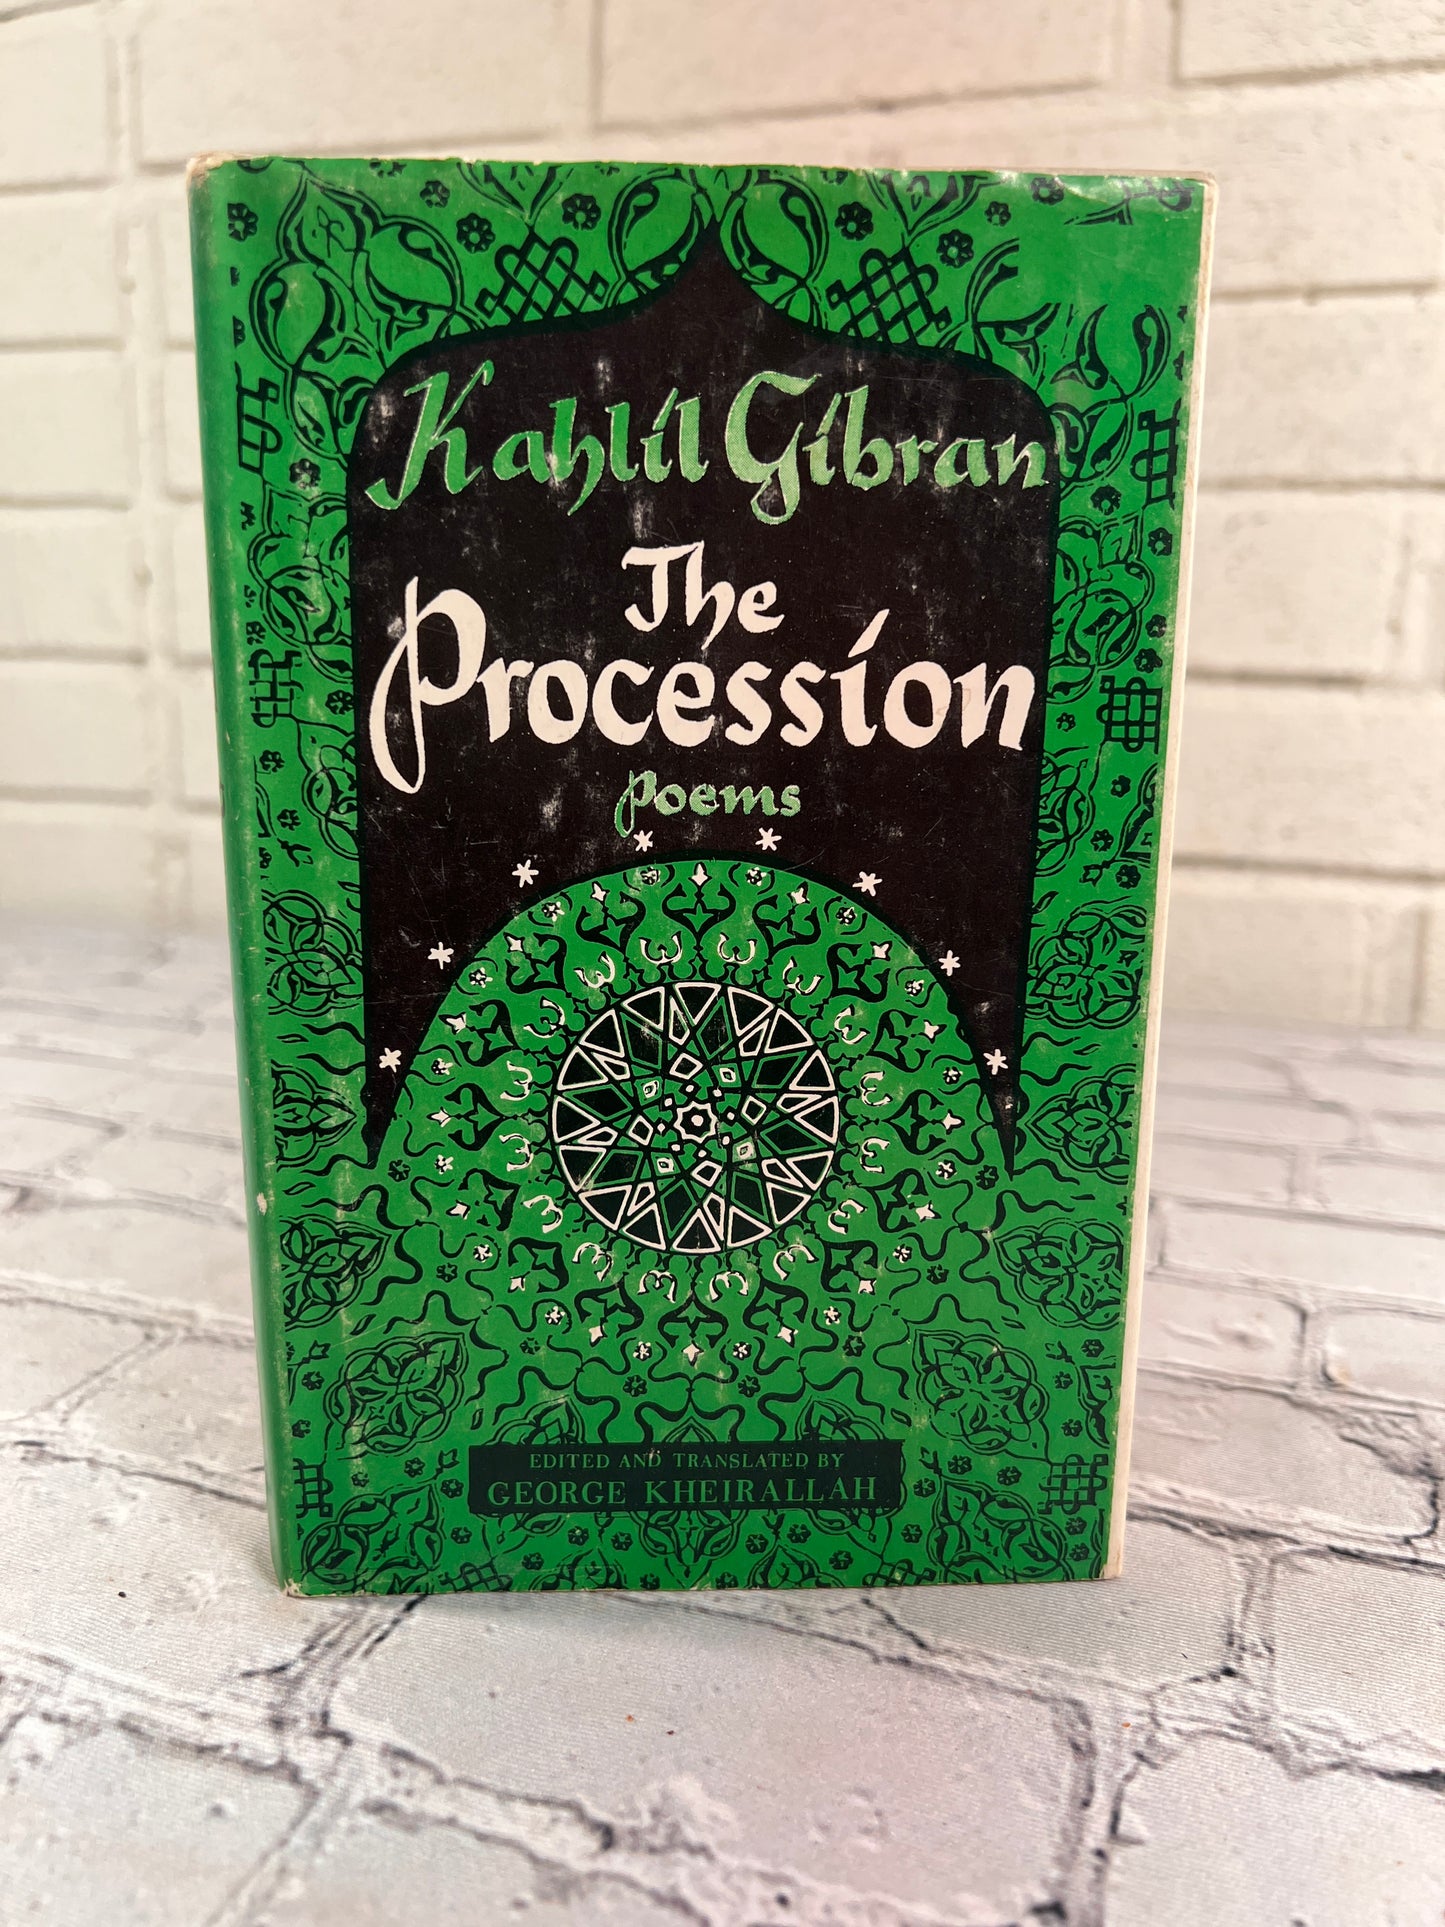 The Procession Poems by Kahlil Gibran [1958]